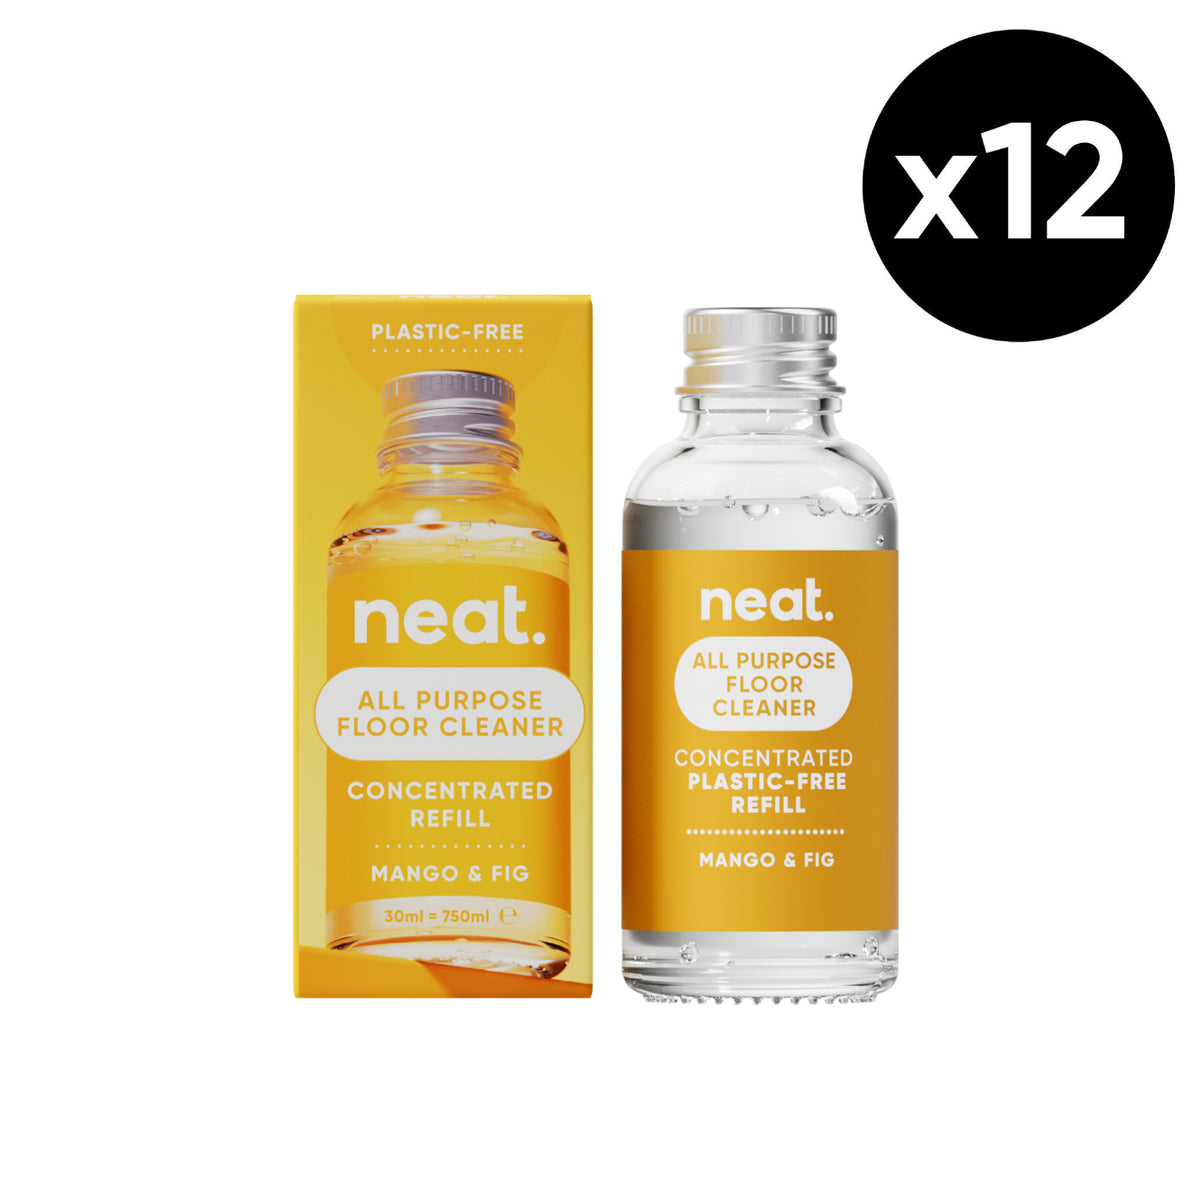 12x neat. All Purpose Floor Cleaner Refill - Mango & Fig (1 case)